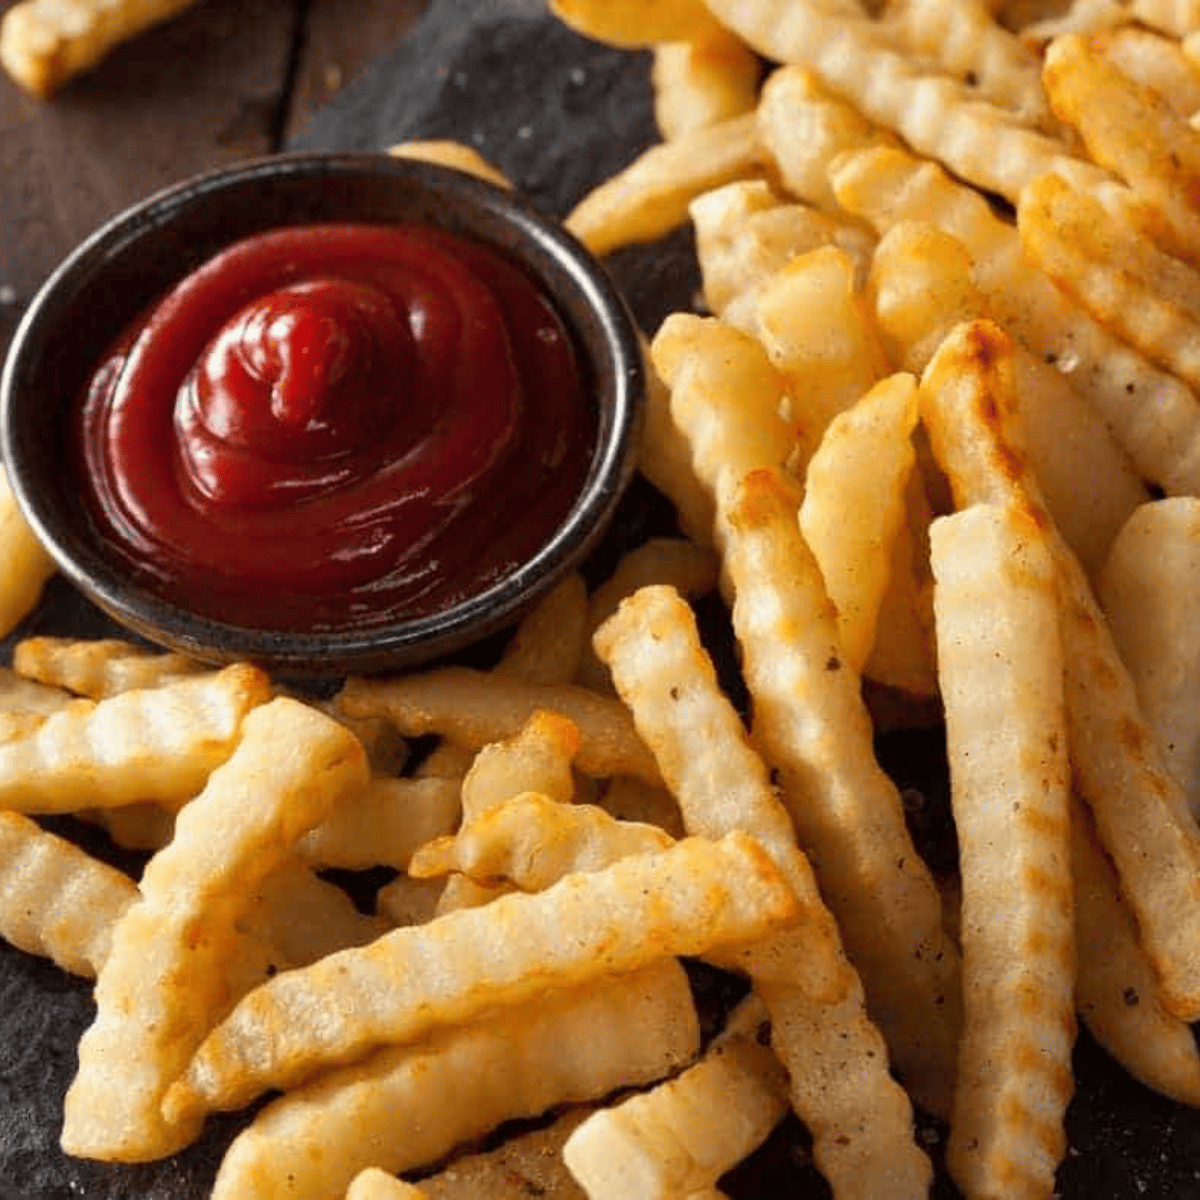 https://forktospoon.com/wp-content/uploads/2021/06/Air-Fryer-Frozen-French-Fries-With-French-Fry-Seasoning.png